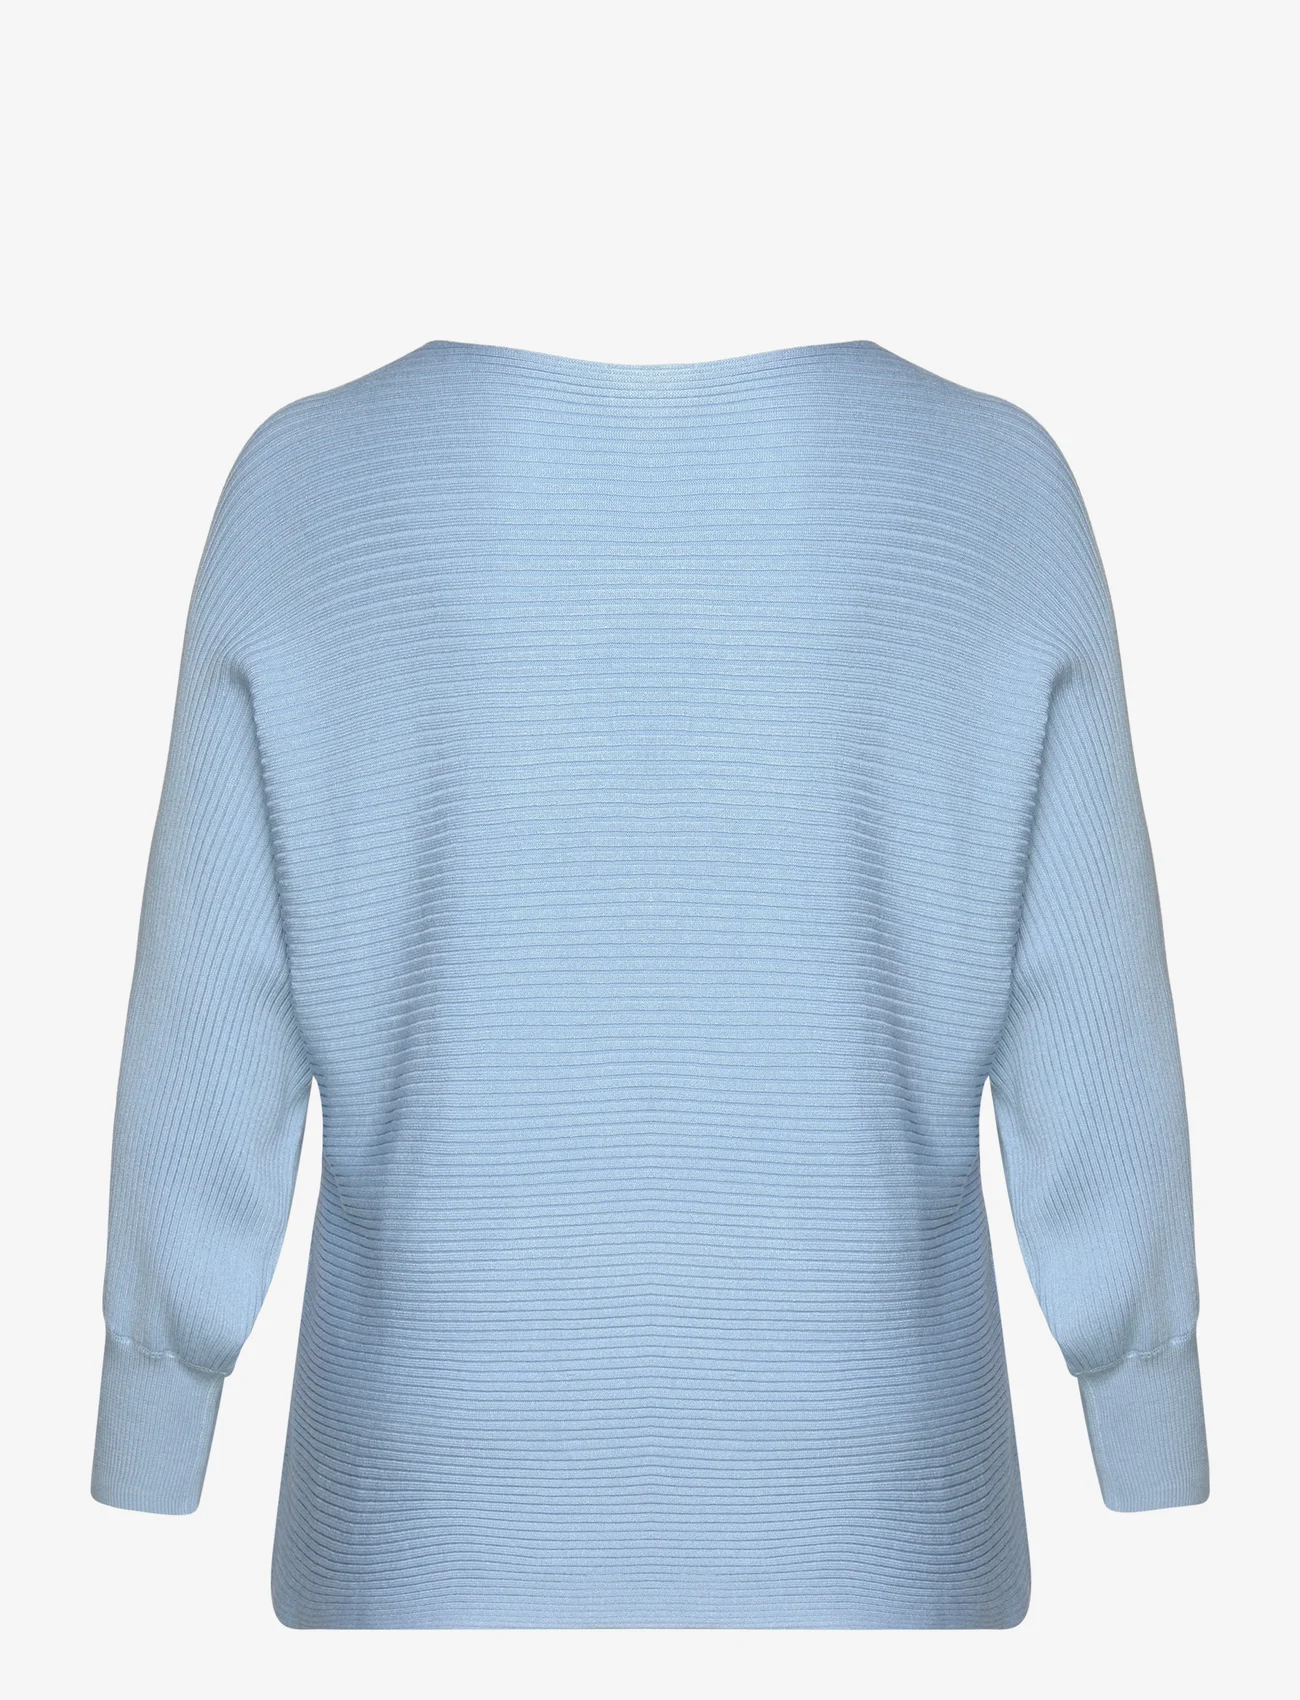 ONLY Carmakoma - CARNEW ADALINE L/S PULLOVER KNT - mažiausios kainos - blue bell - 1